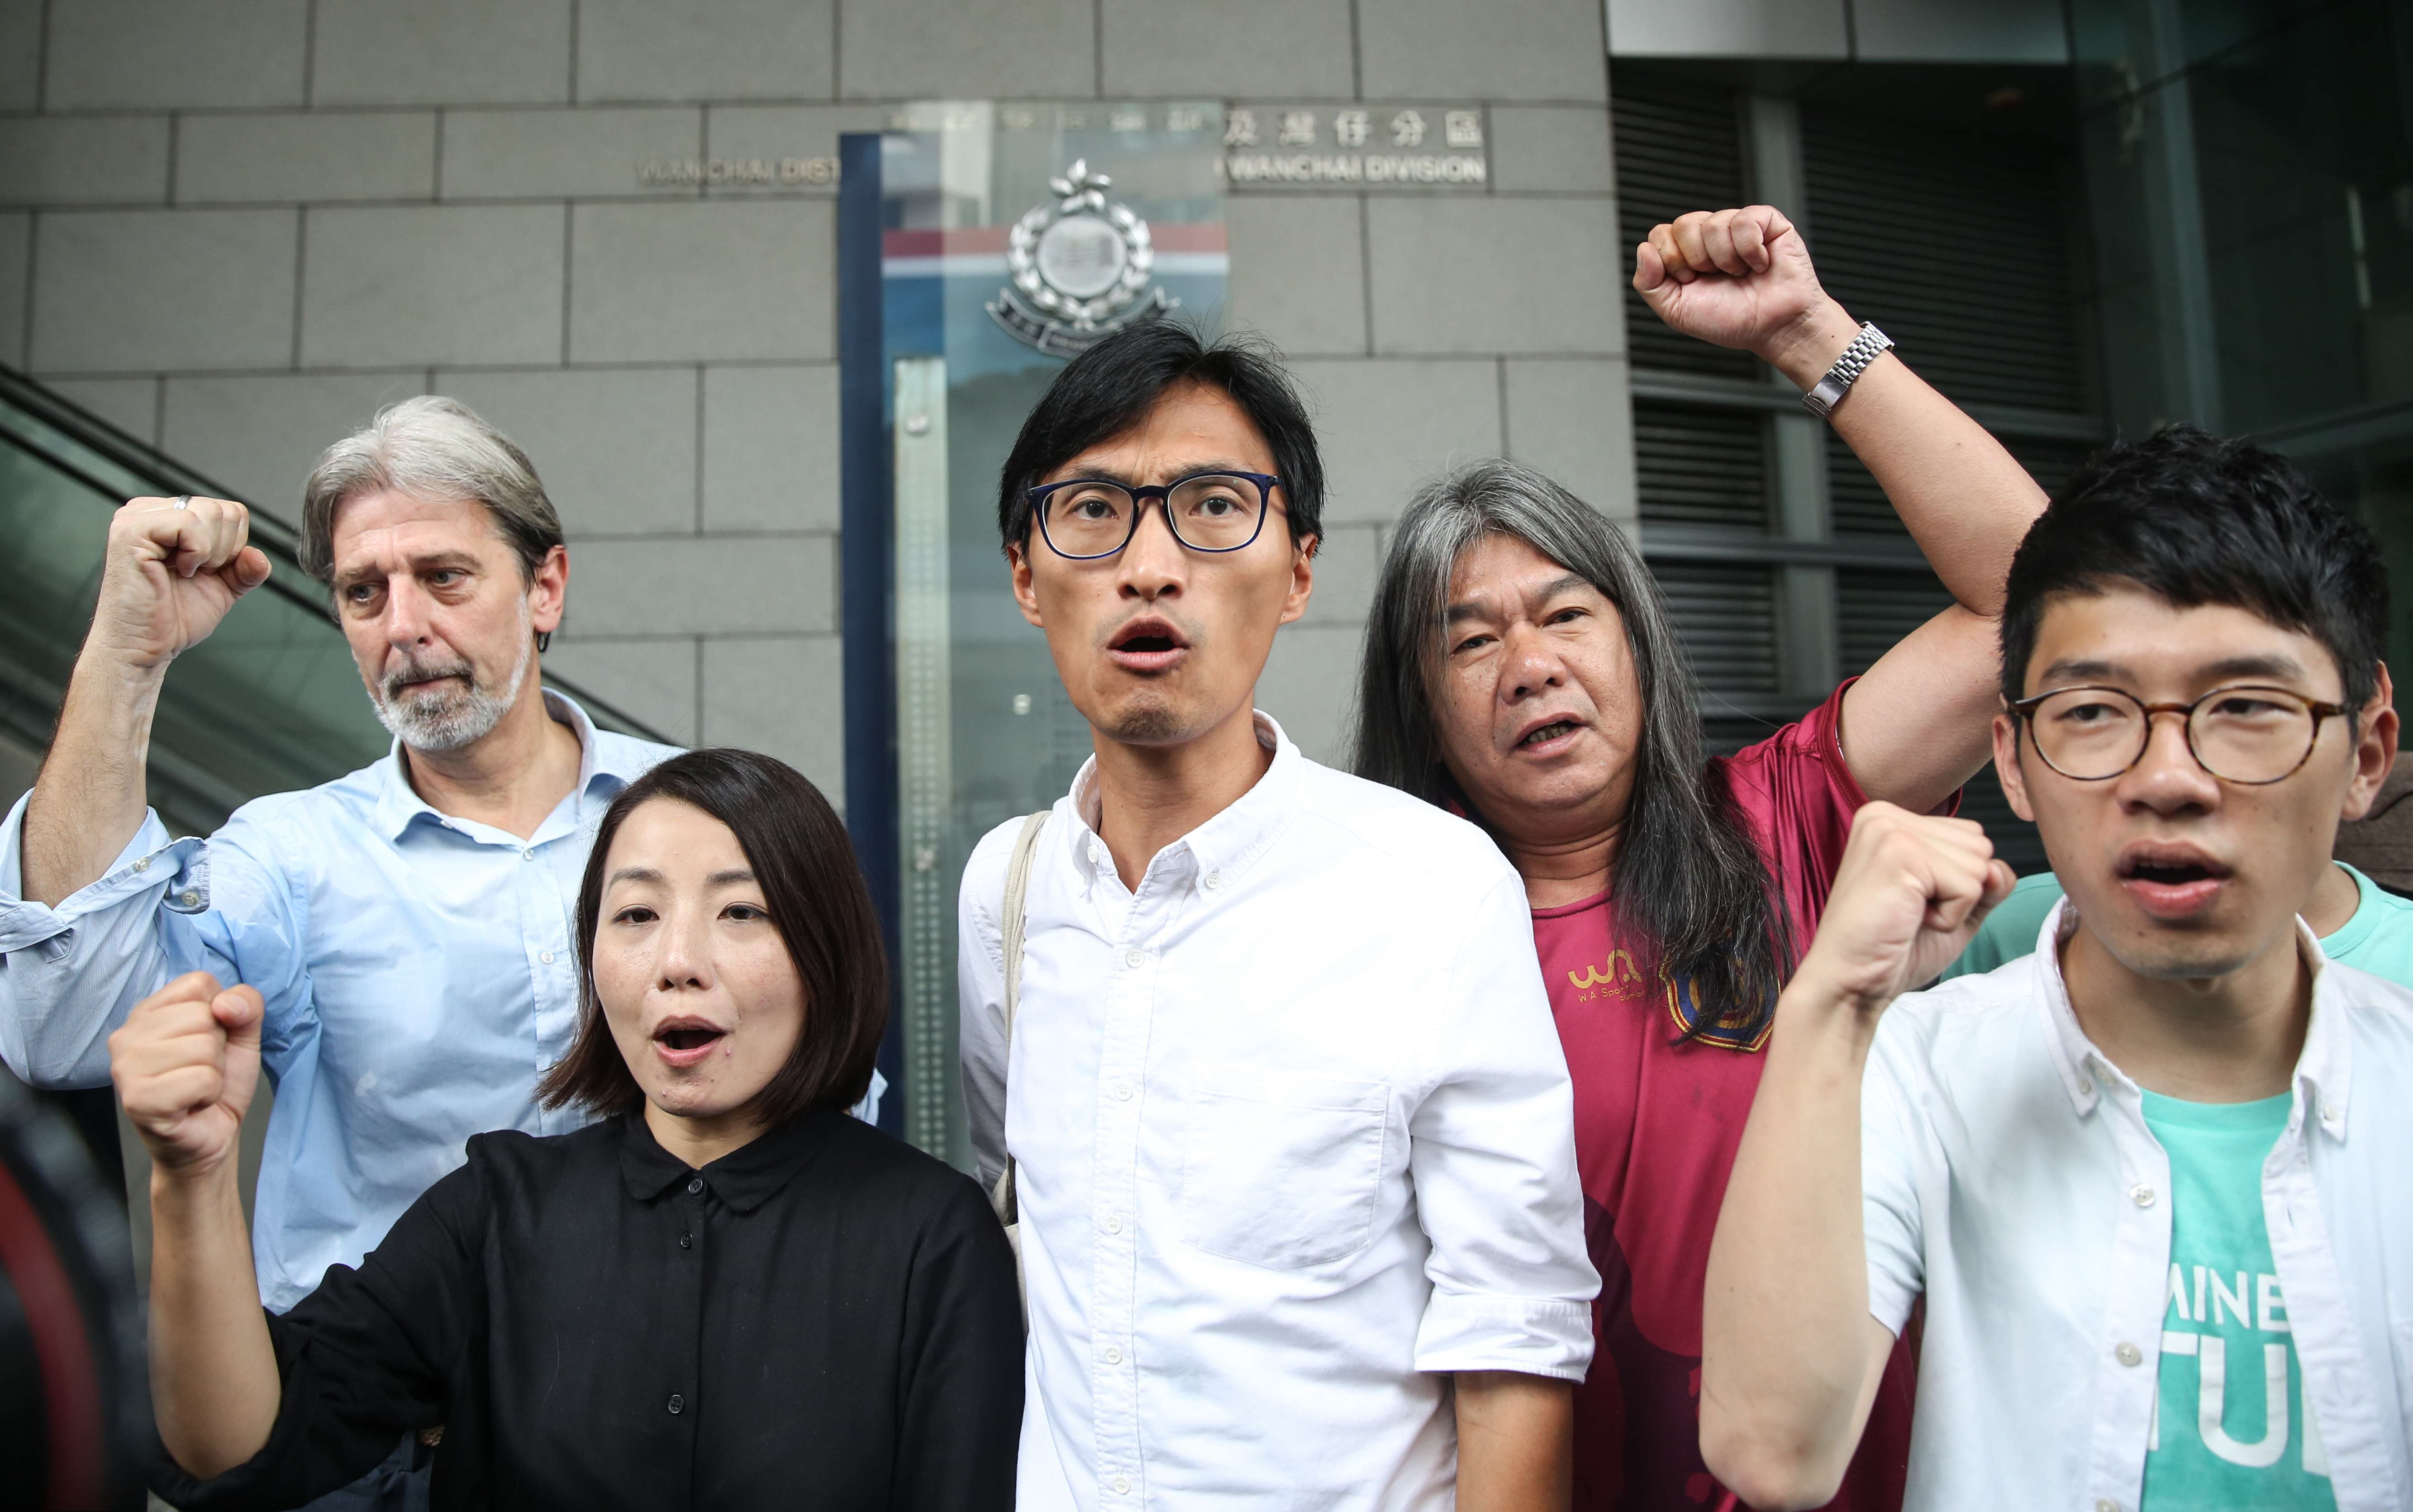 Celebrating their victory in the Legislative Council election are (from left), Lau Siu-lai, Eddie Chu, “Long Hair” Leung Kwok-hung and Nathan Law. Photo: Sam Tsang